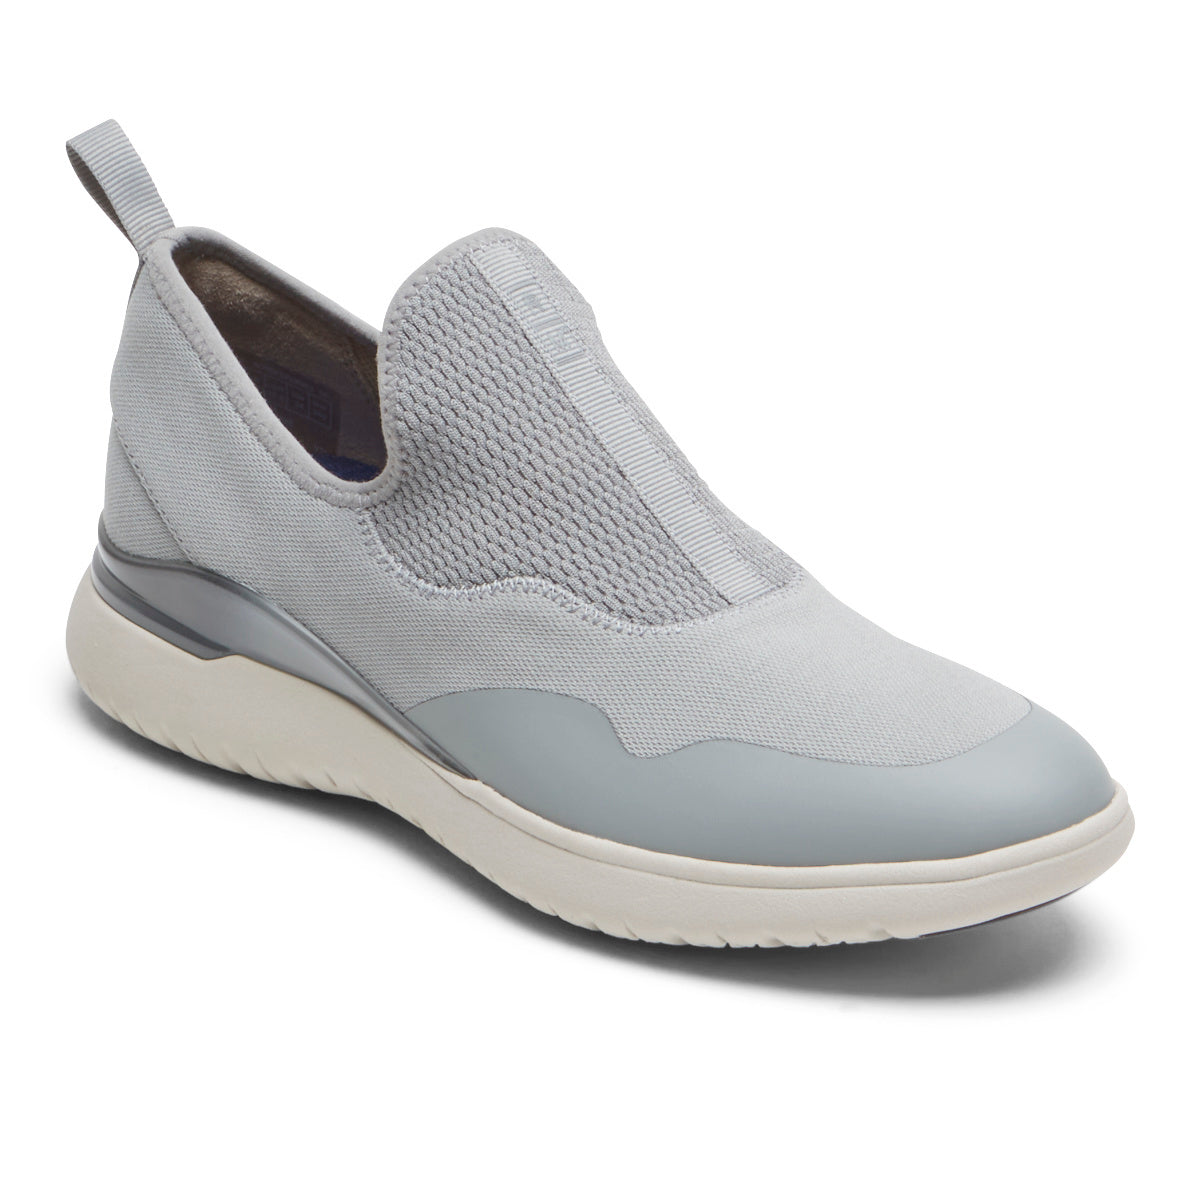 Womens Rockport + Ministry of Supply Total Motion?R+M